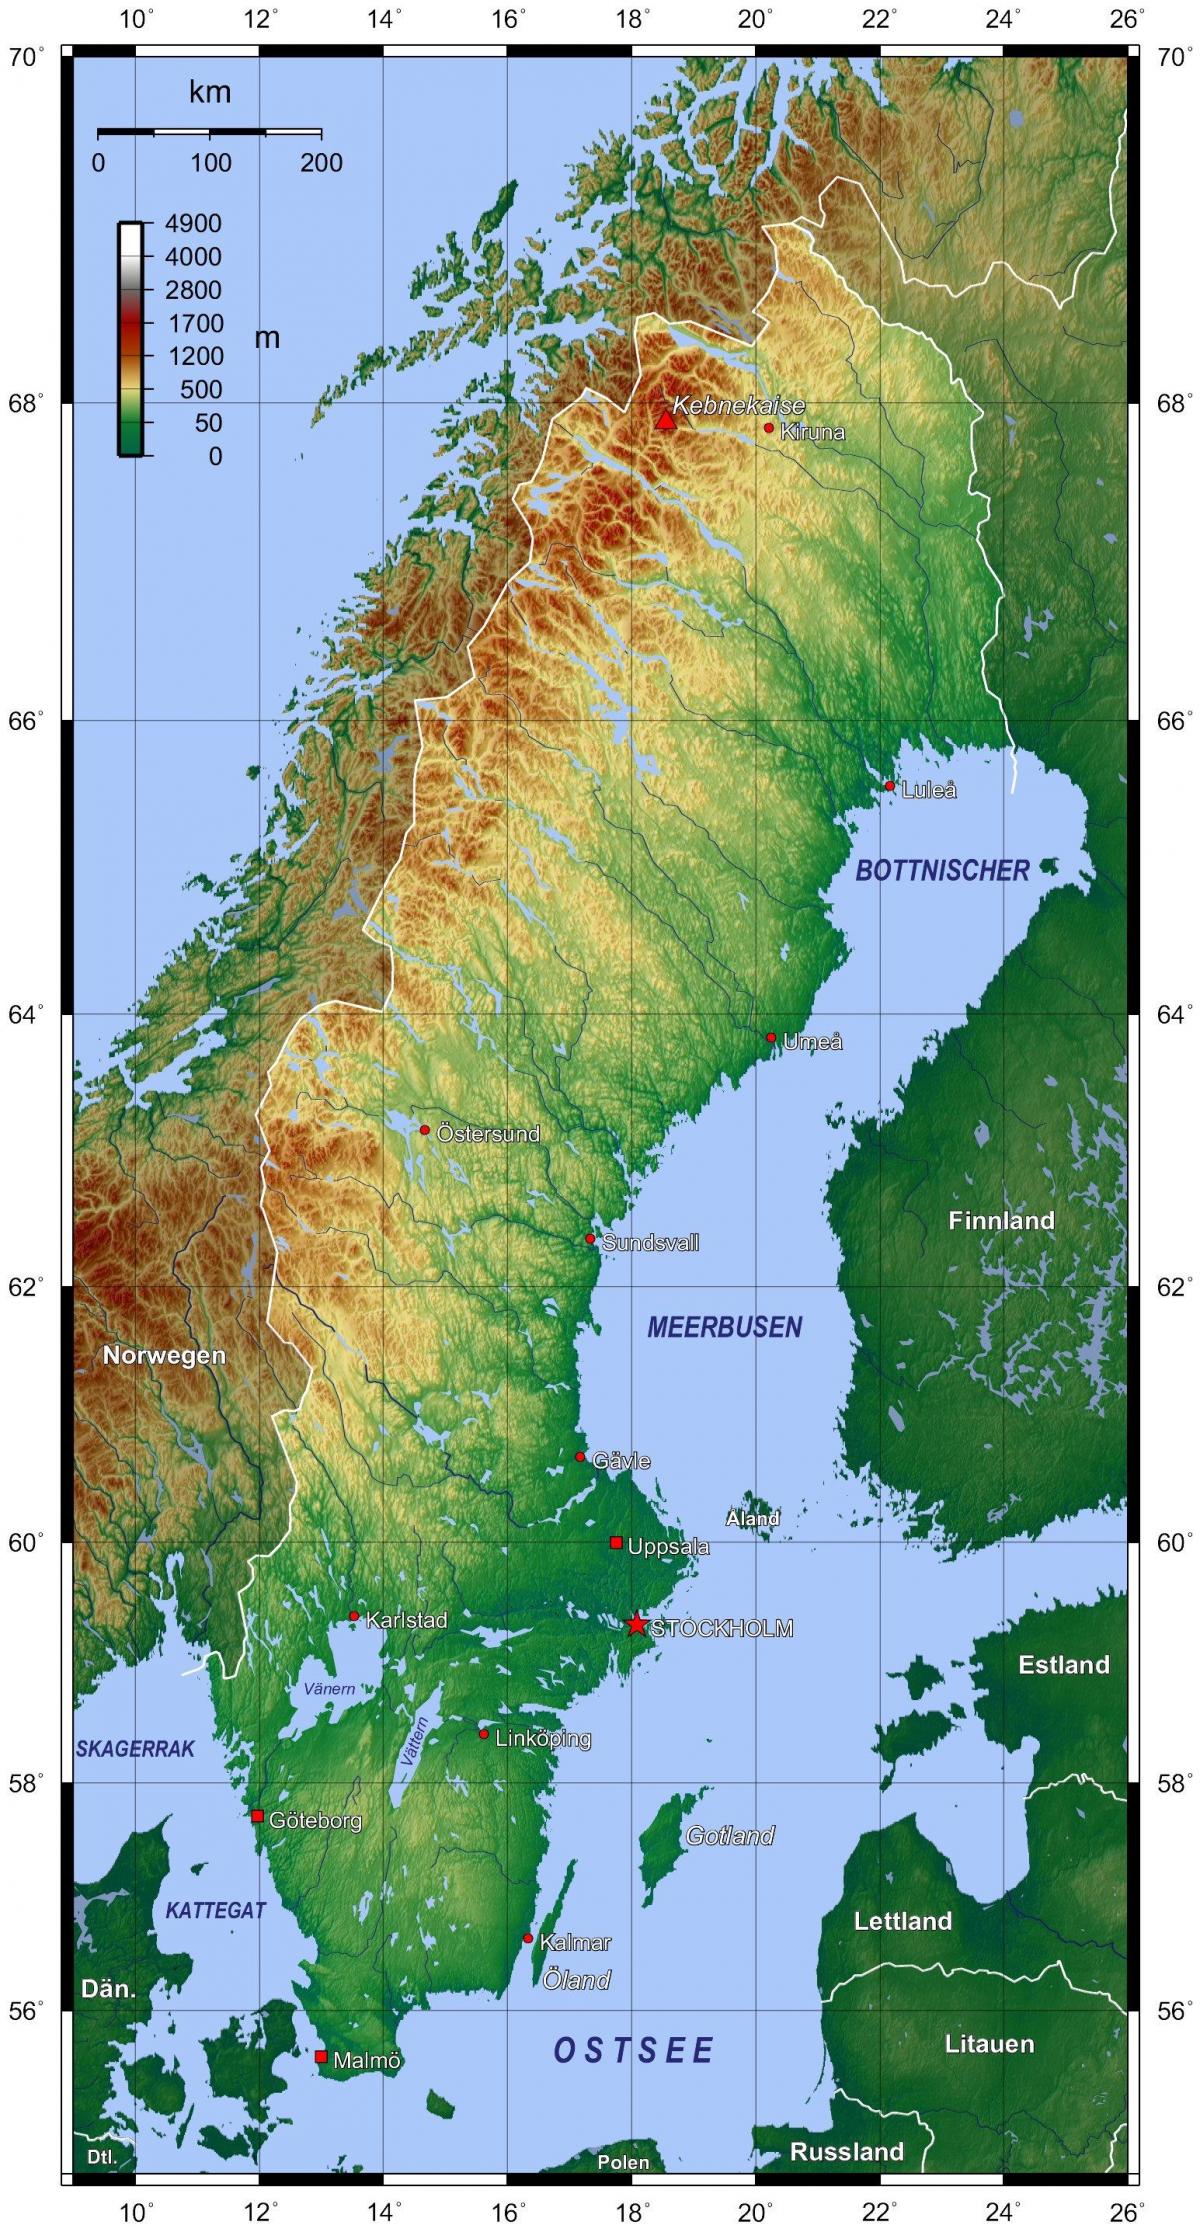 Sweden topographic map - Topographic map of Sweden (Northern Europe